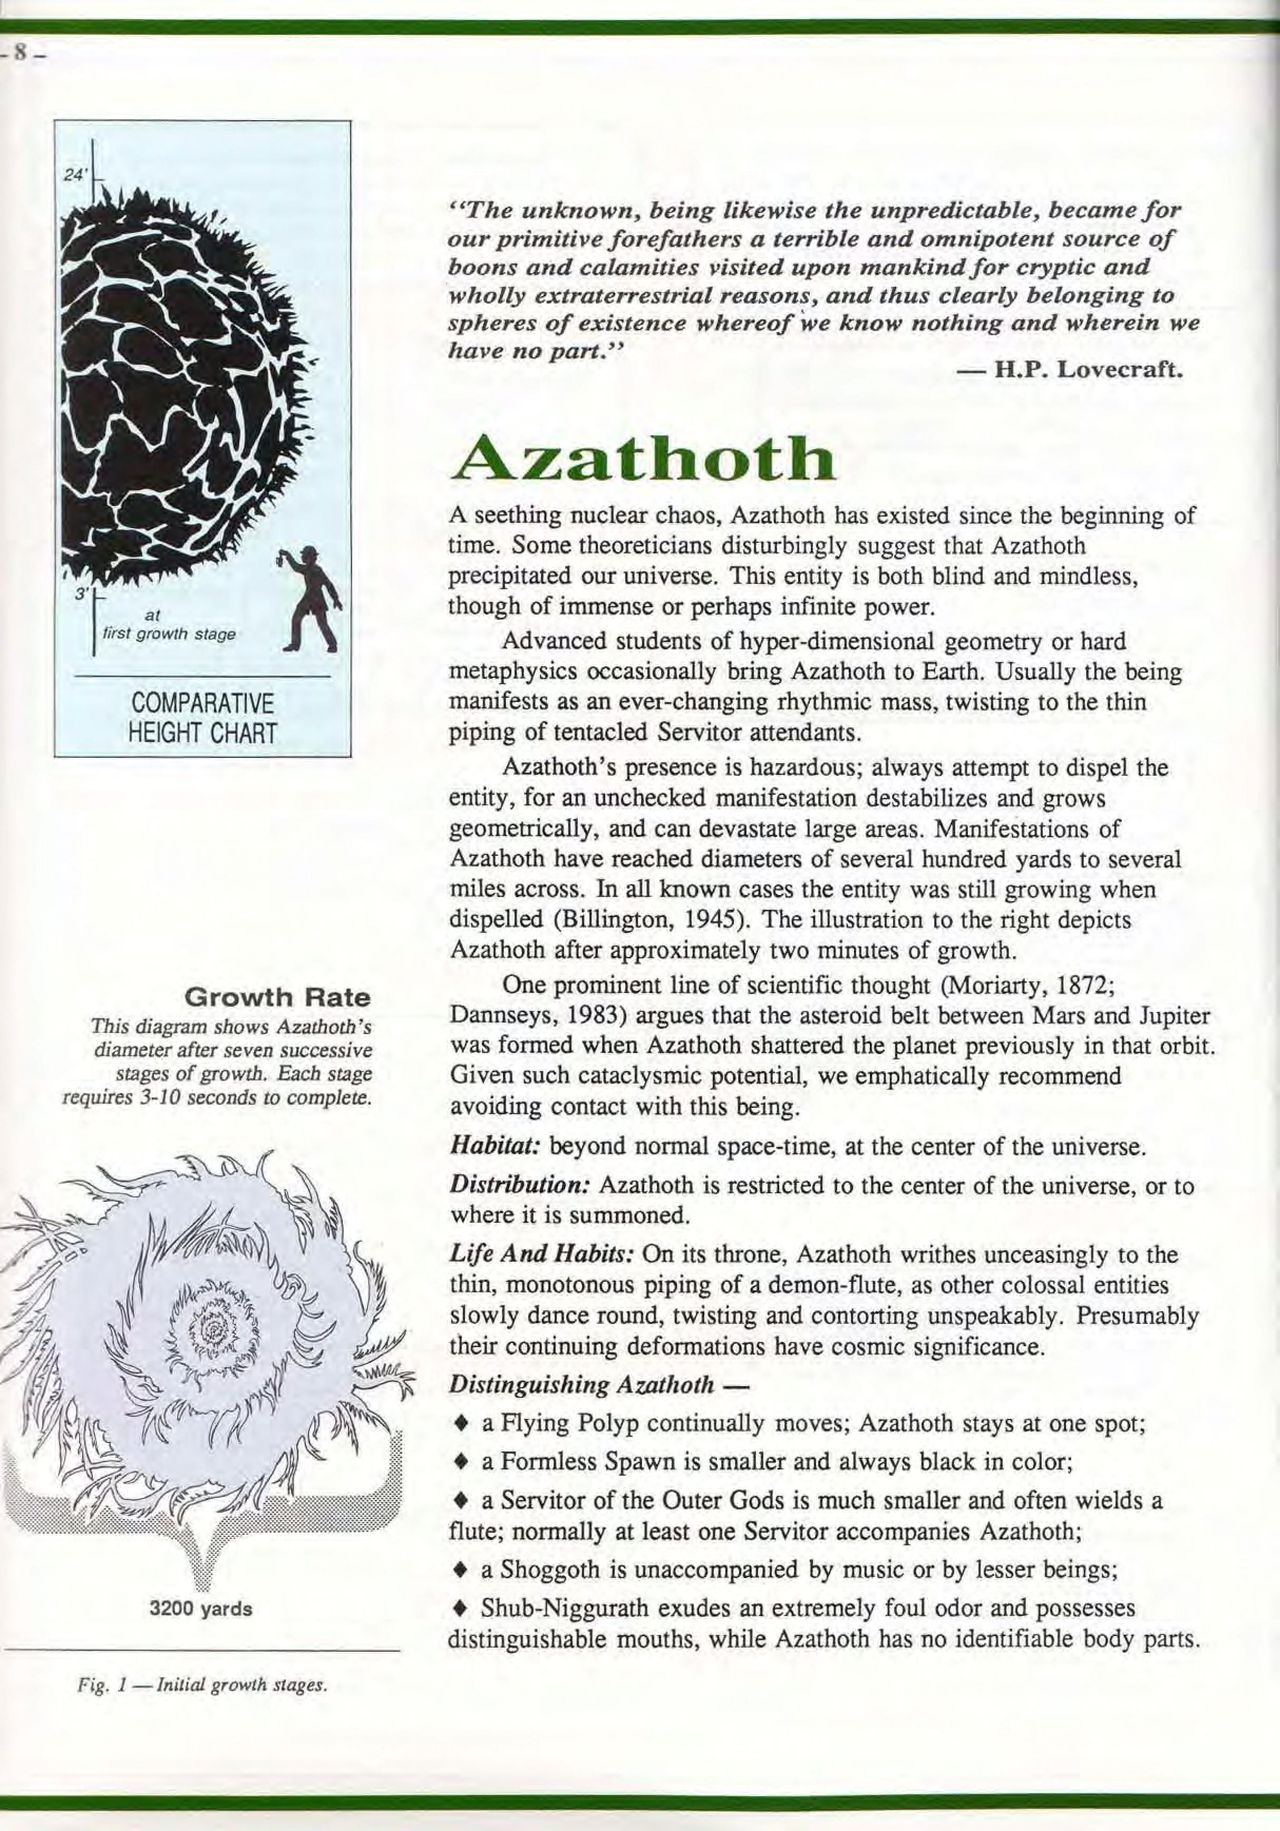 S. Petersen's Field Guide to Cthulhu Monsters 7